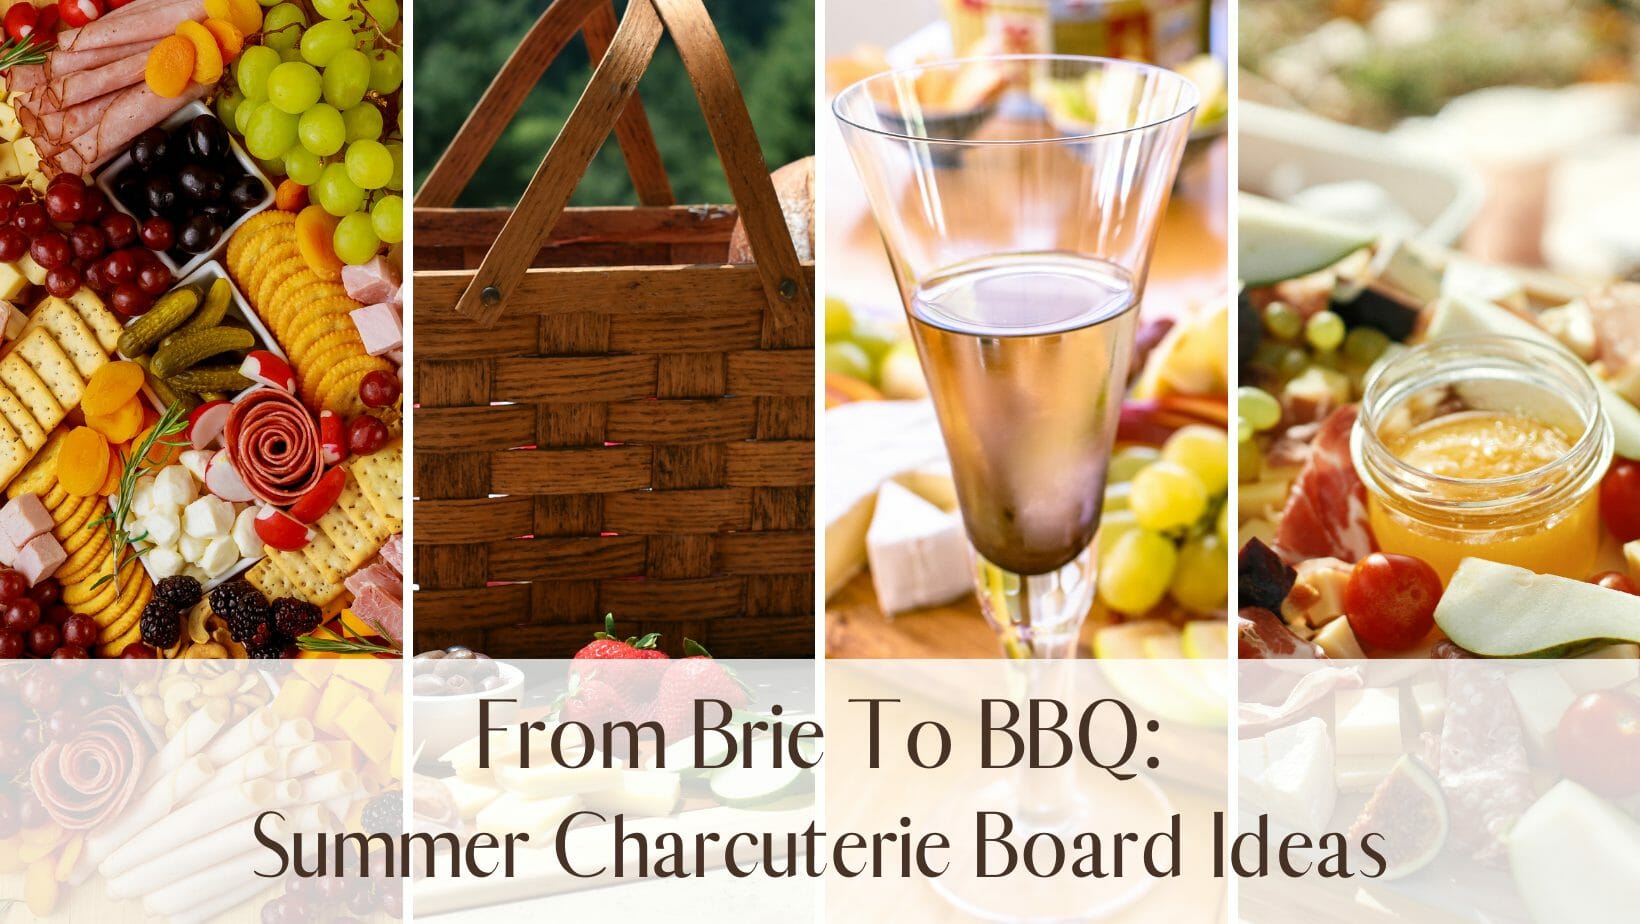 From Brie To BBQ: Summer Charcuterie Board Ideas - ICA